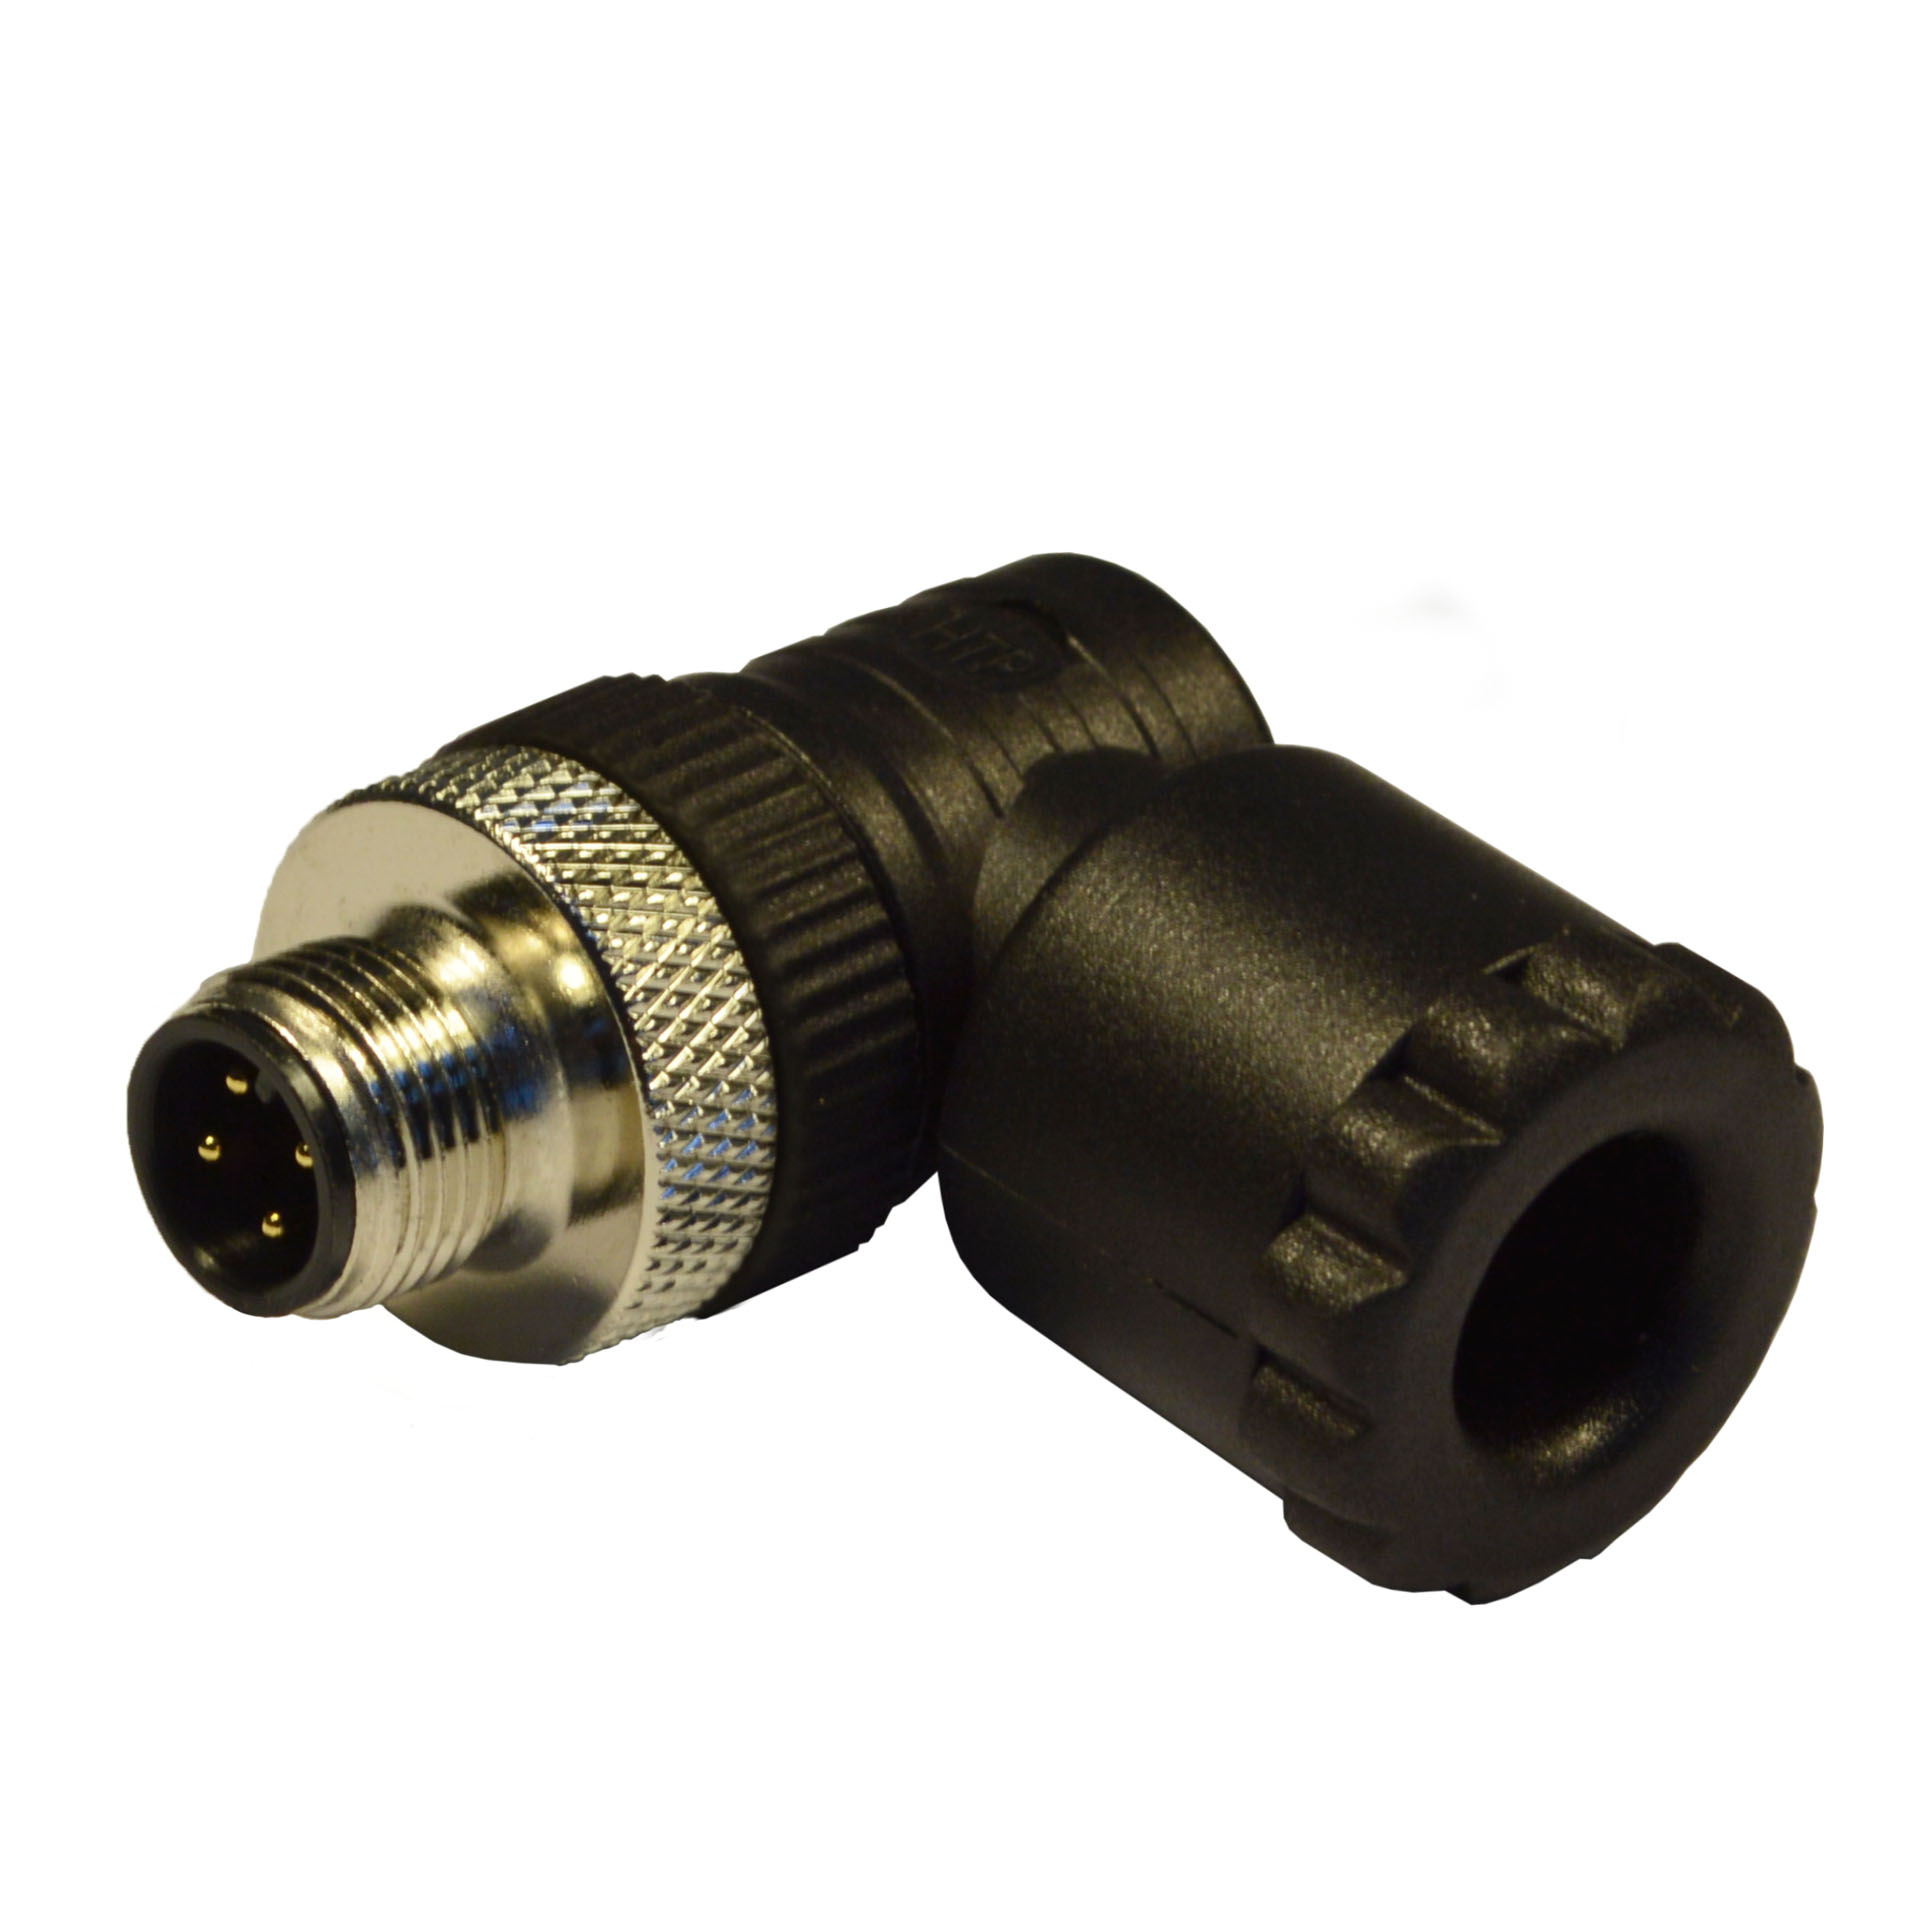 M12 field attachable,male,90°,4p.,PG9/11unif. or double exit cable